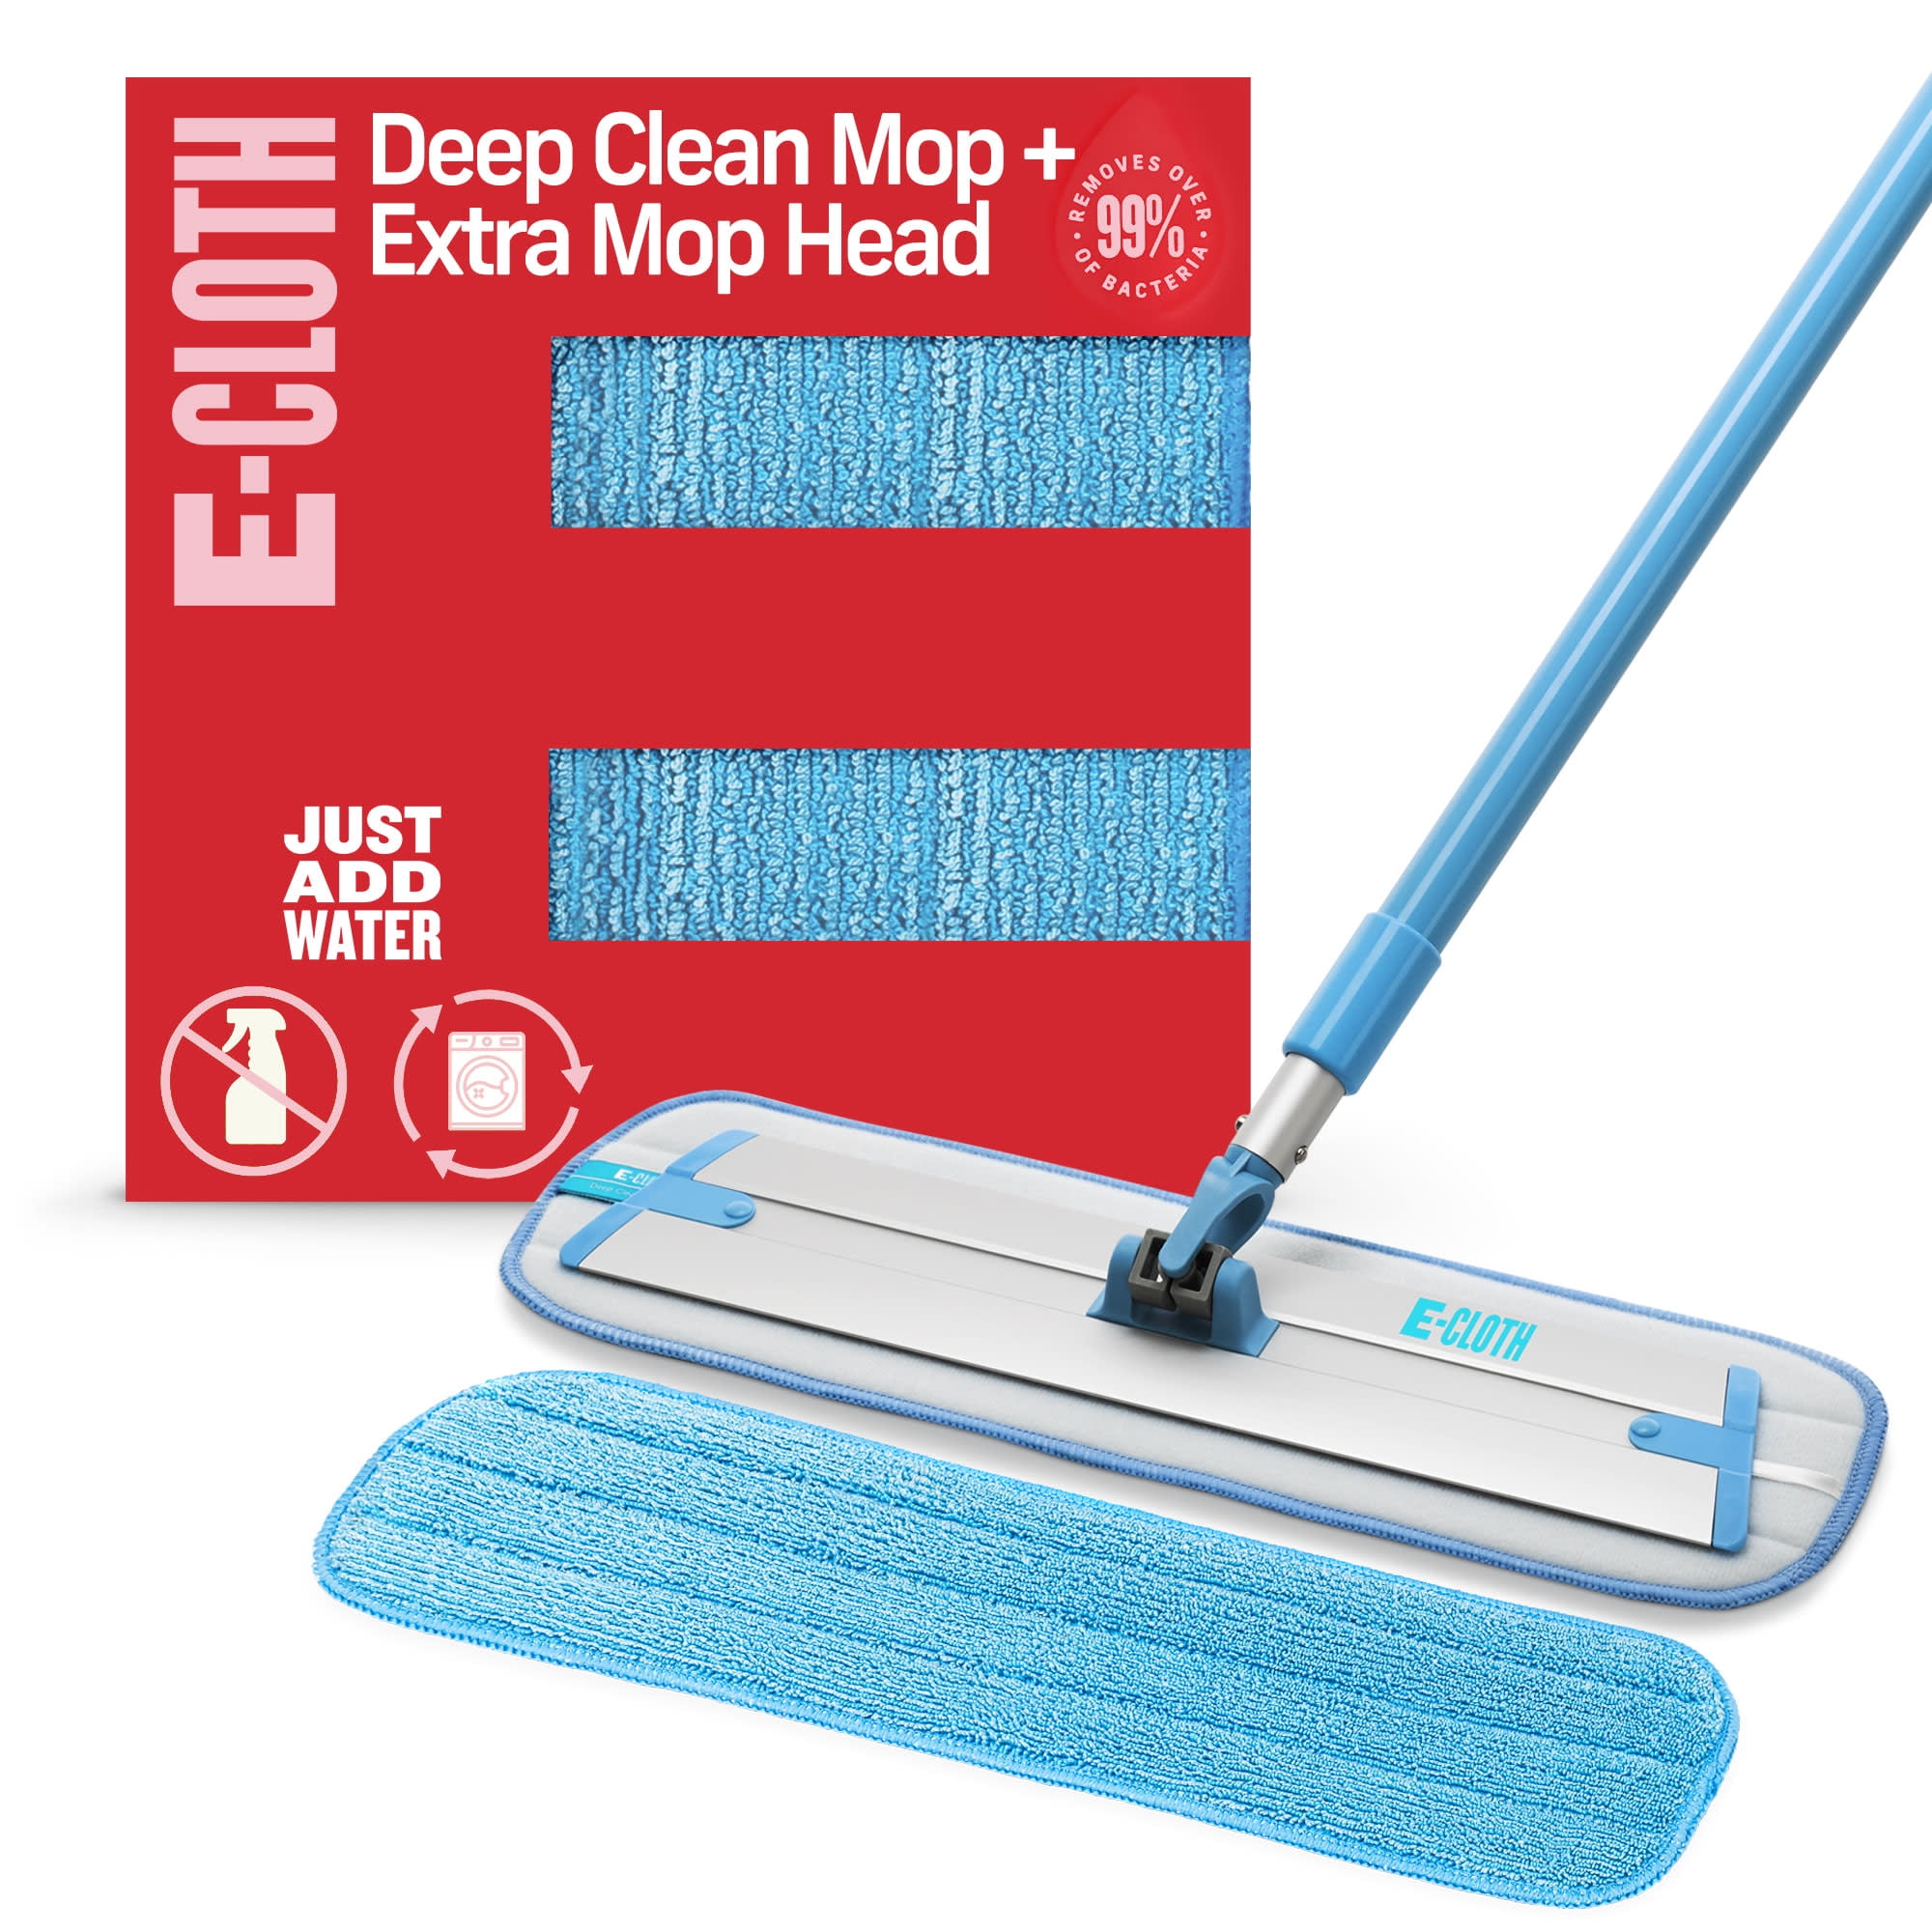 5 ULTRA MICROFIBER 25" CLEANING PADS DUST MOPS  EUROCLEAN PERFECT CLEAN 